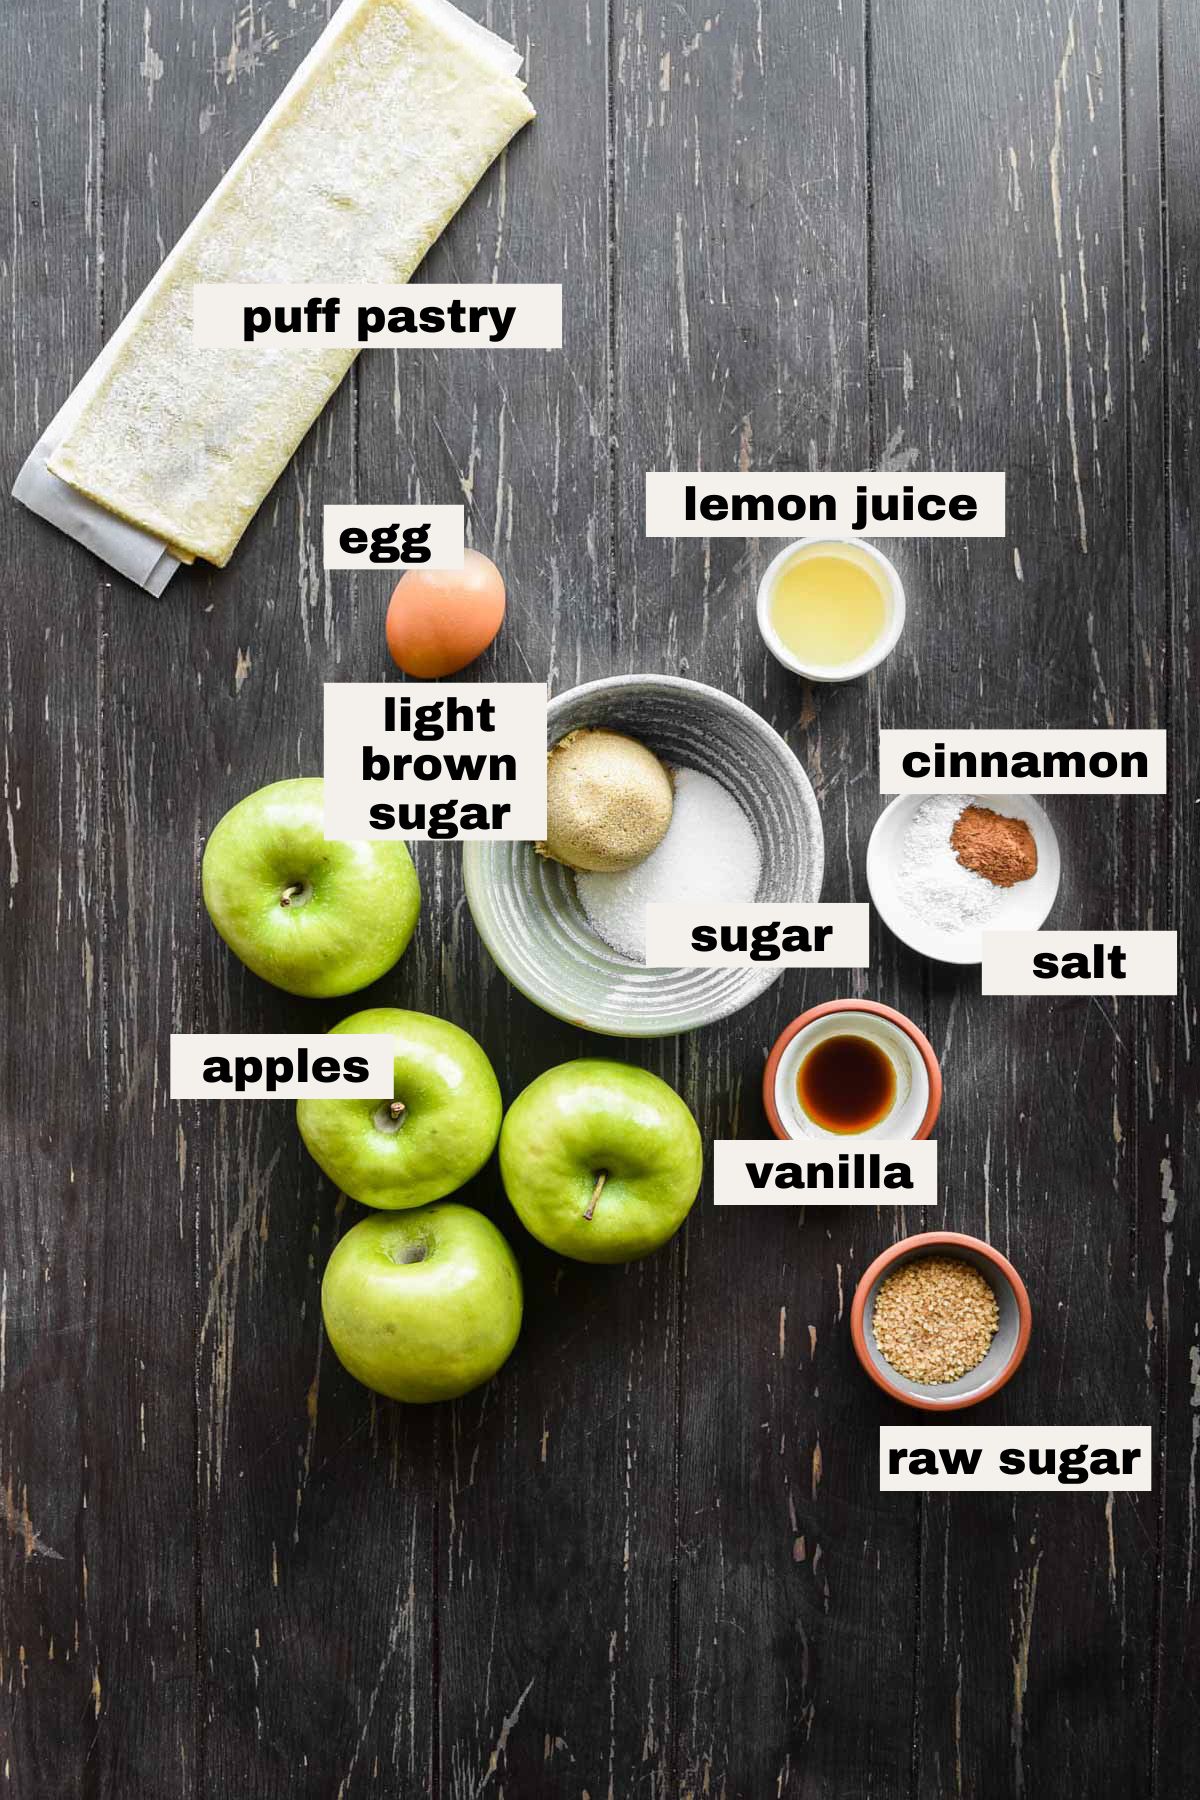 Ingredients to make puff pastry apple galette on a table and labeled.